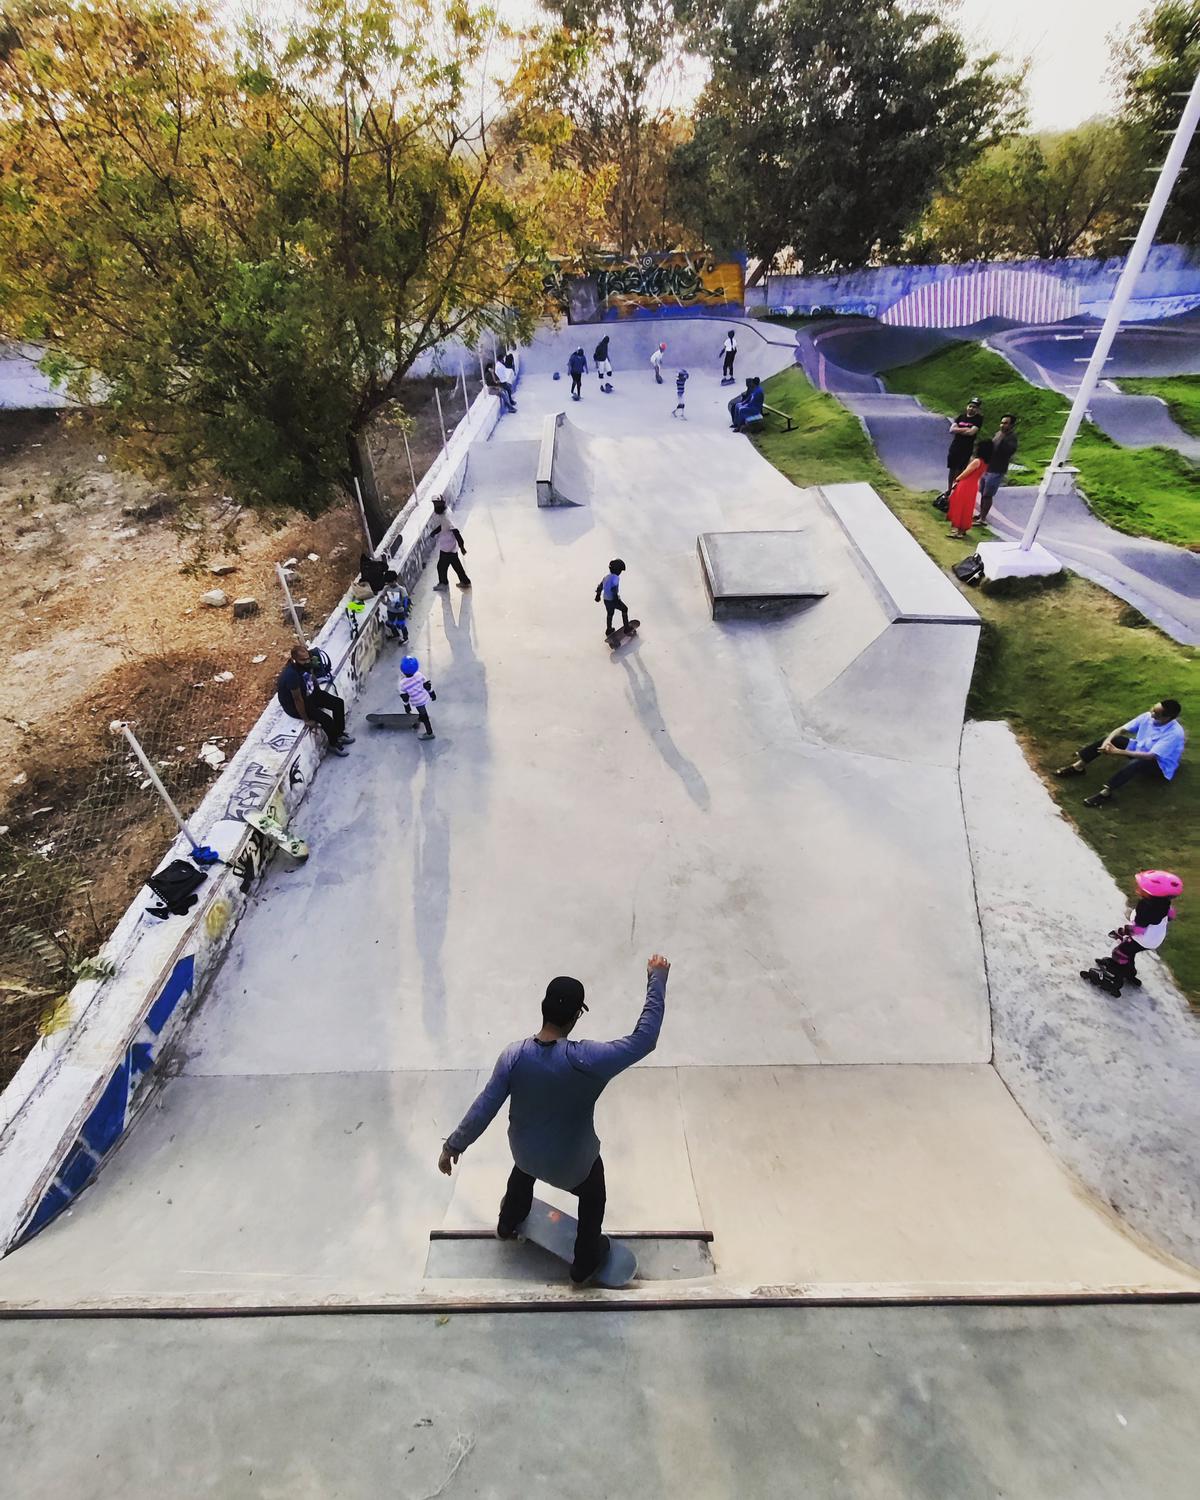 Wallride Park was started by Hamza Khan in 2017